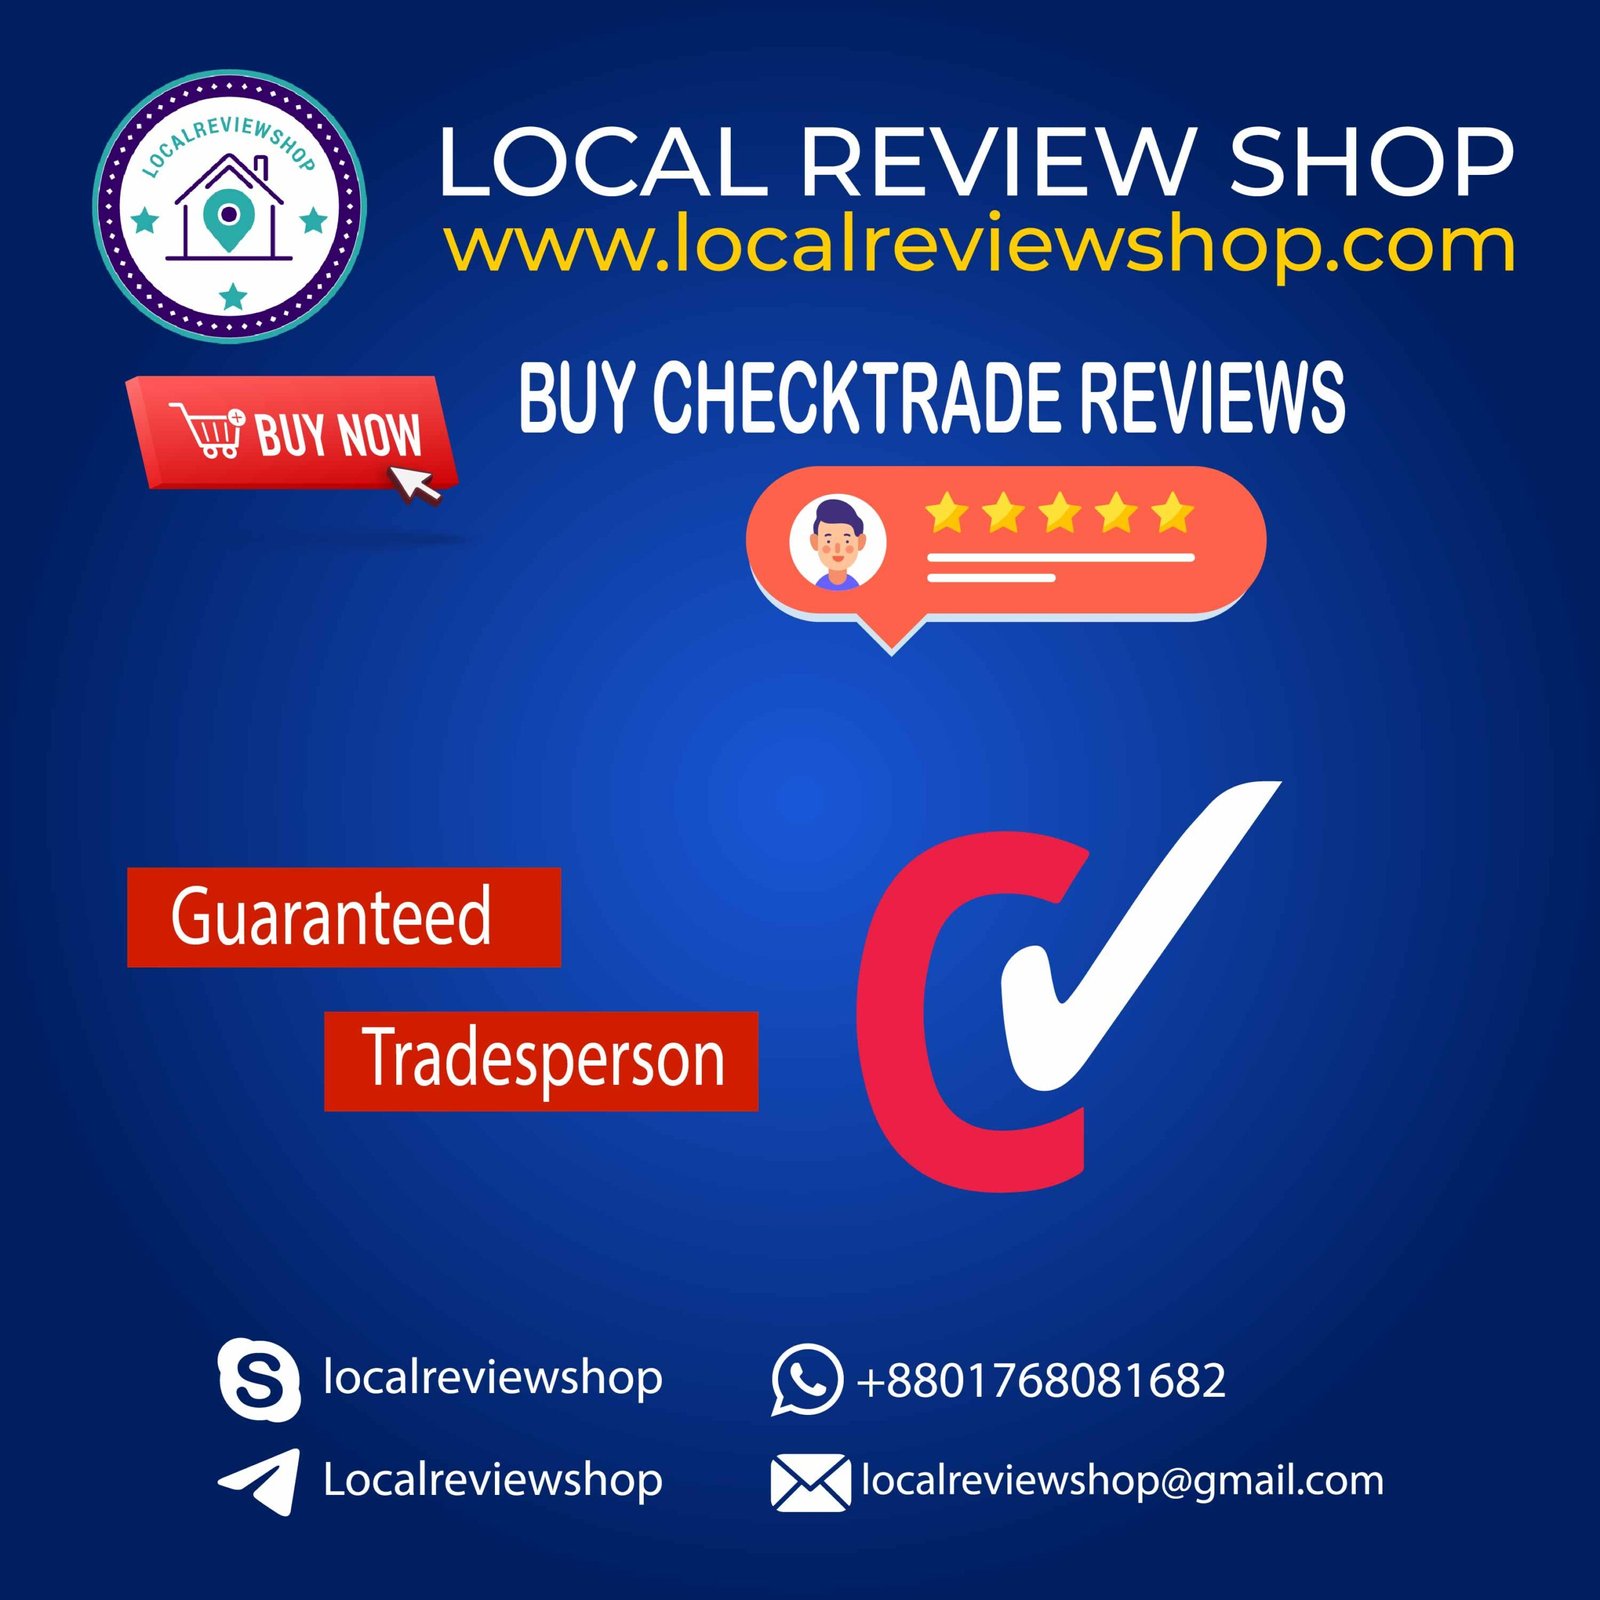 Buy Checkatrade Reviews at lowest cost for promoting business